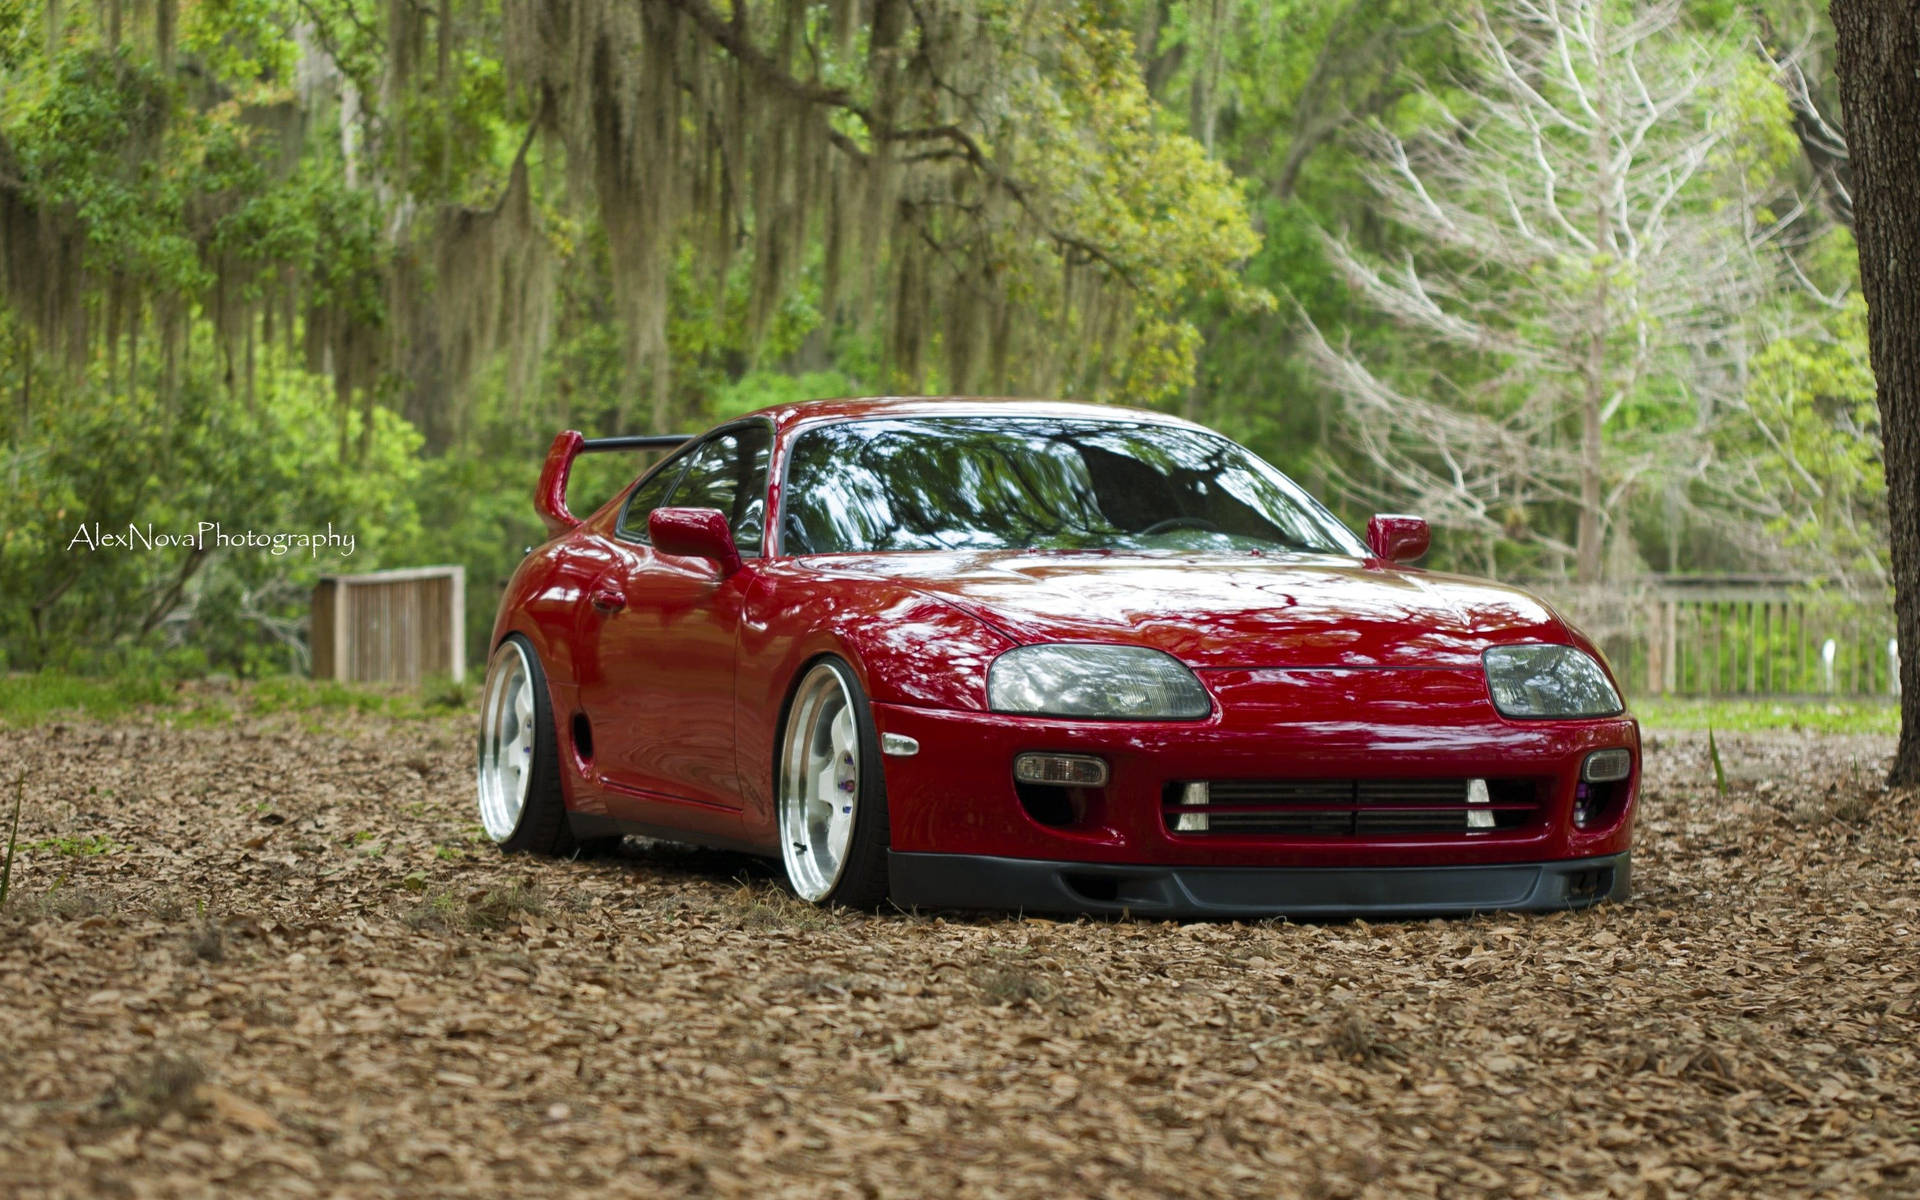 Cruise in Style in this Red JDM Toyota Supra Wallpaper